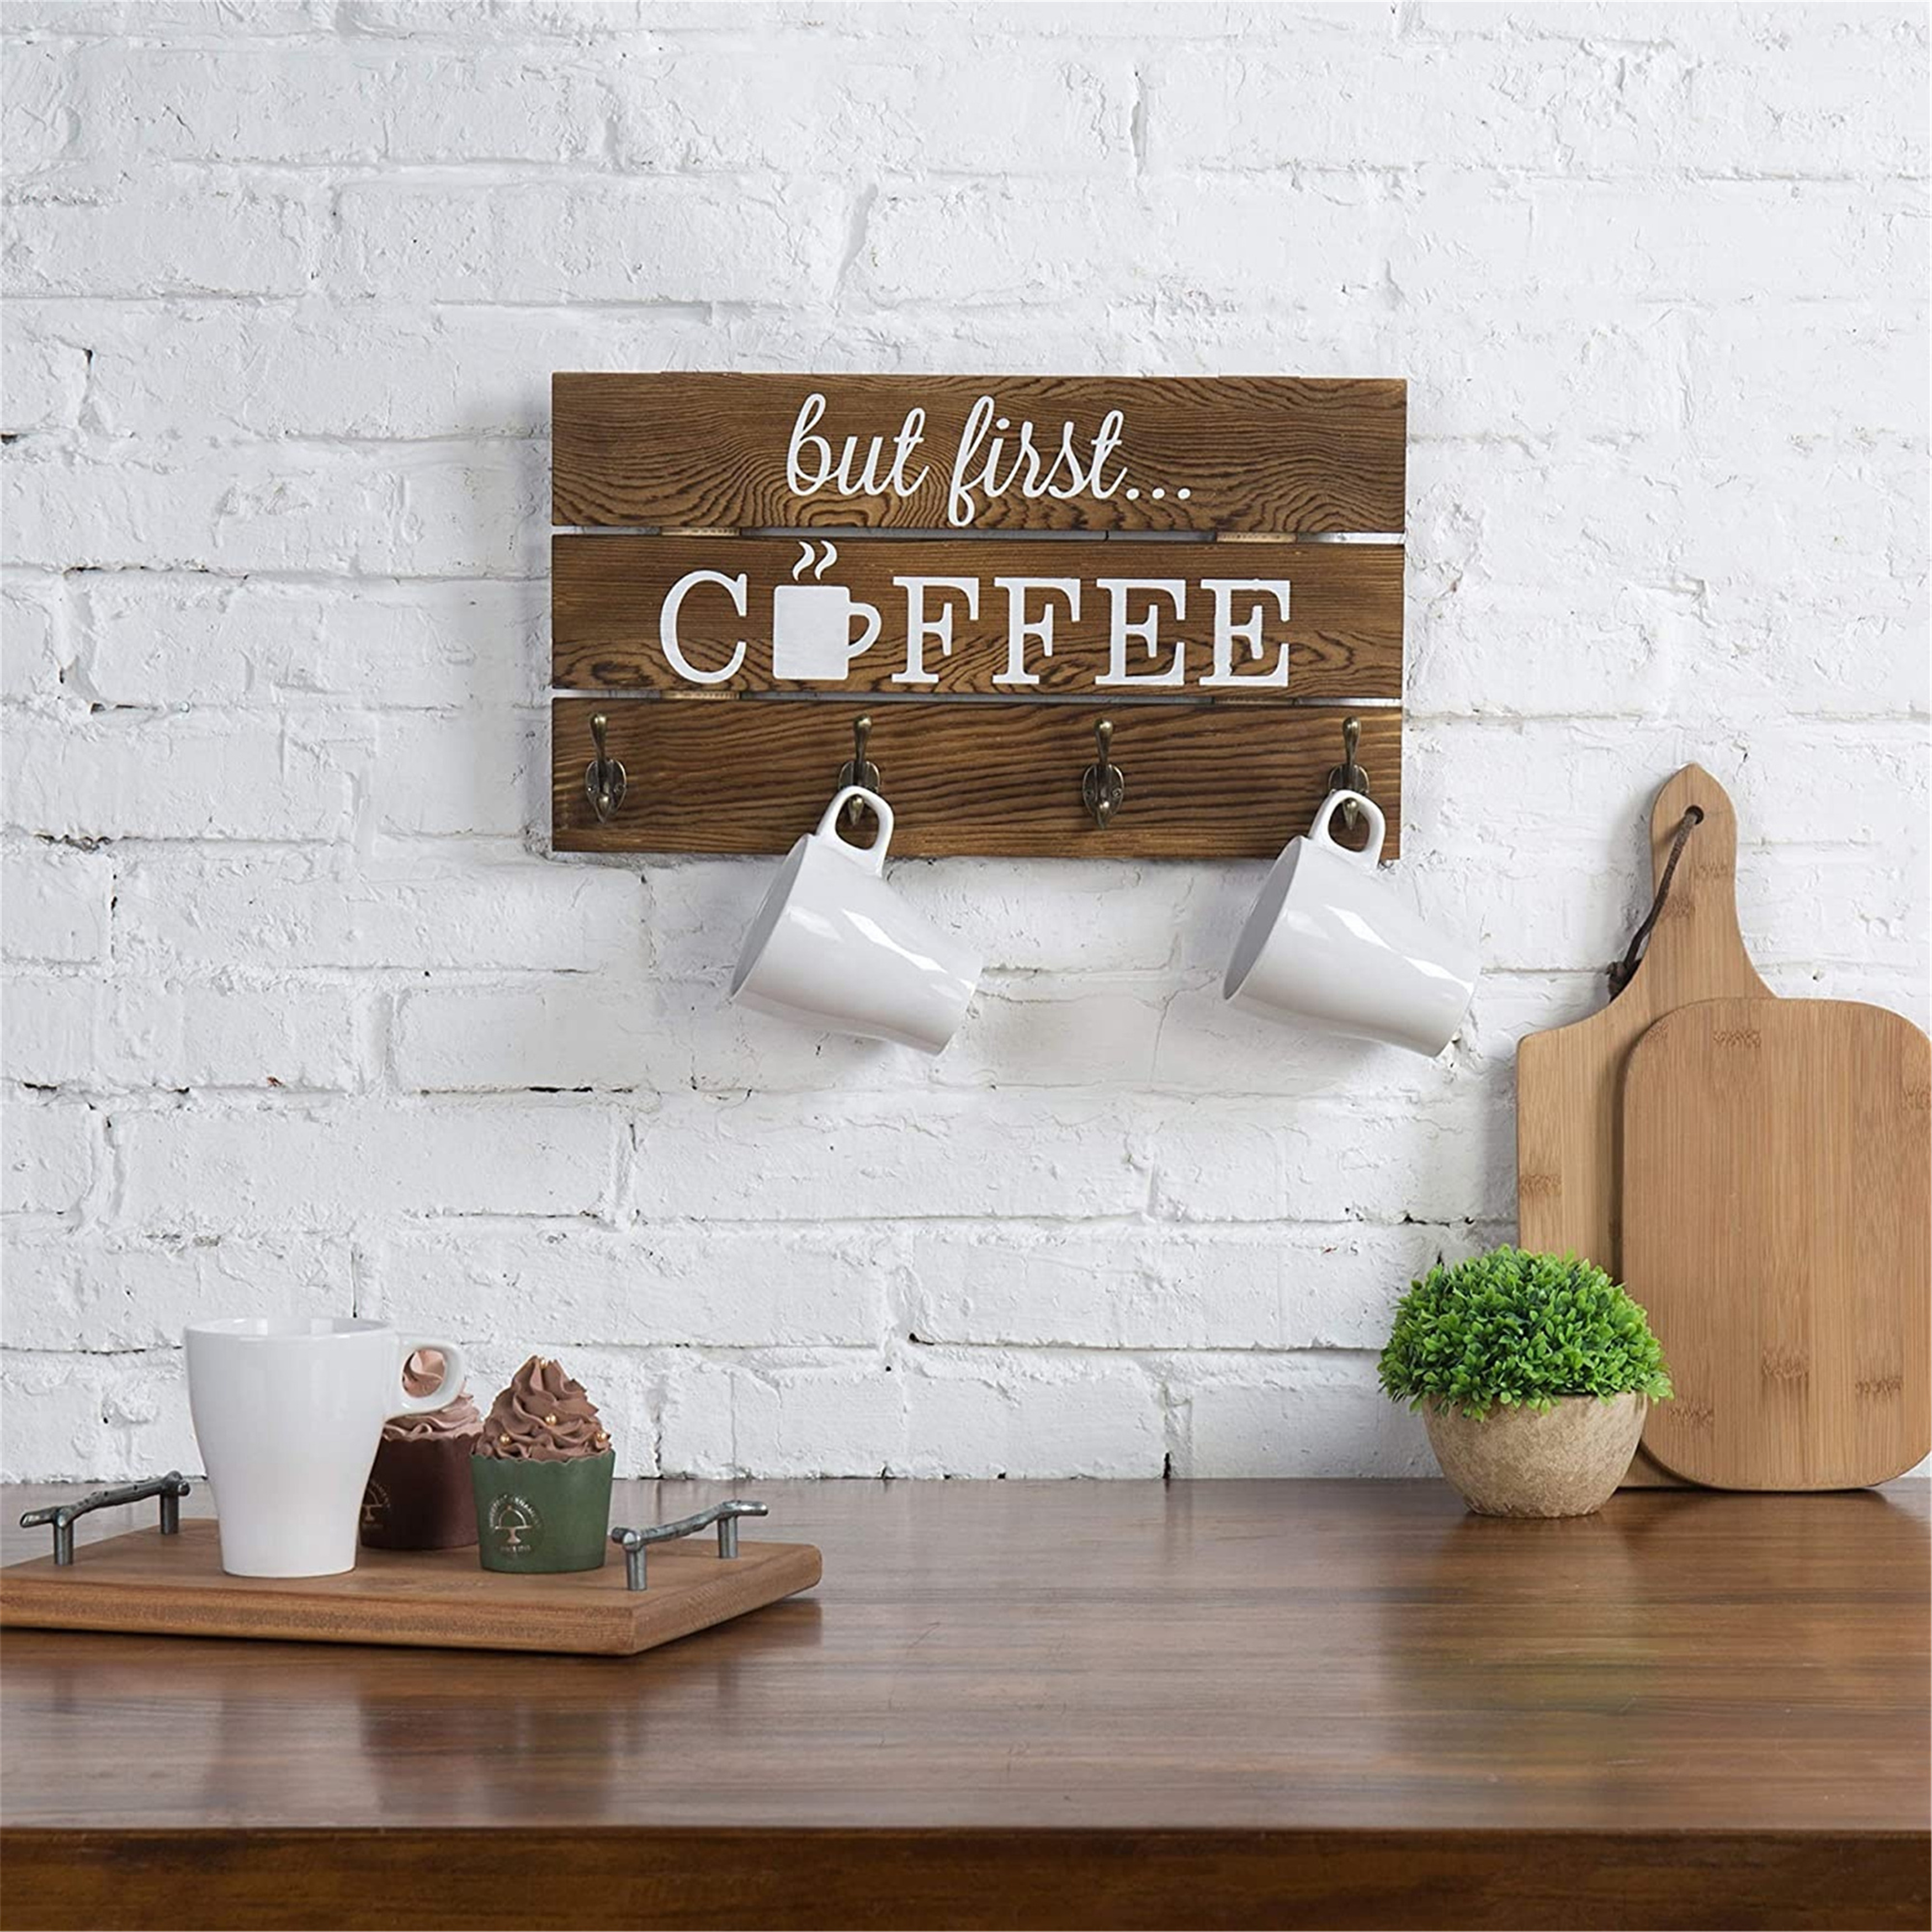 Wooden wall cup drain rack